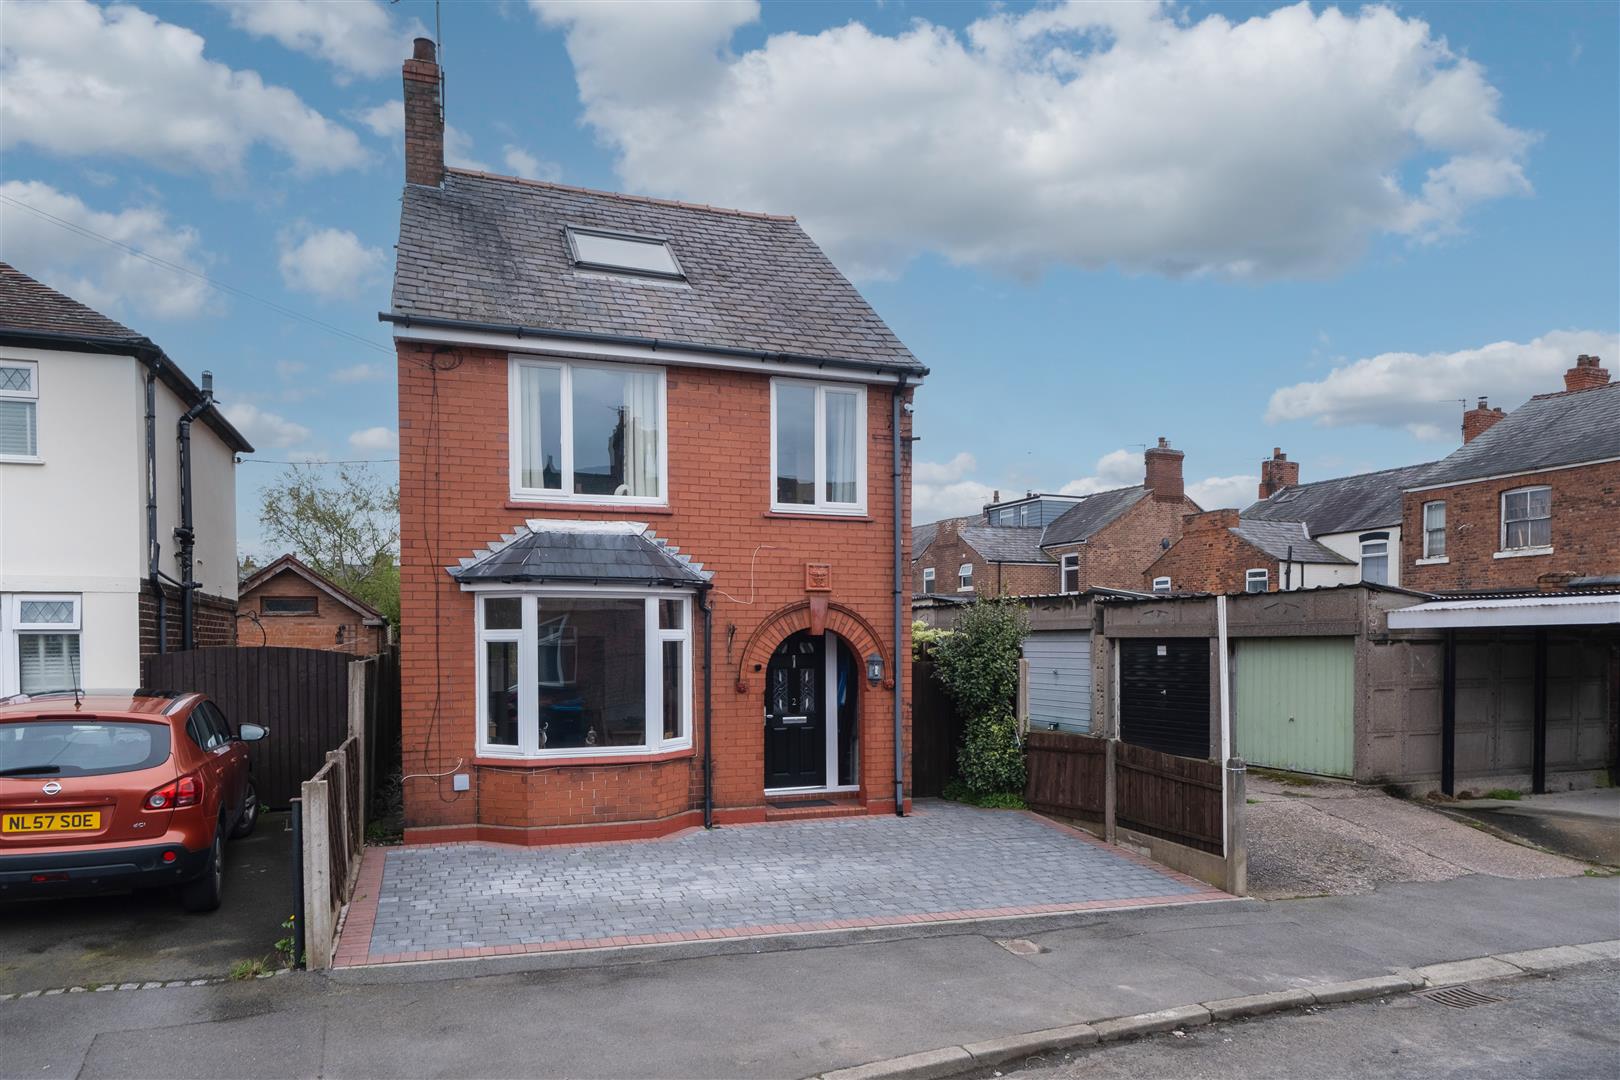 3 bedroom  Detached House for Sale in Northwich